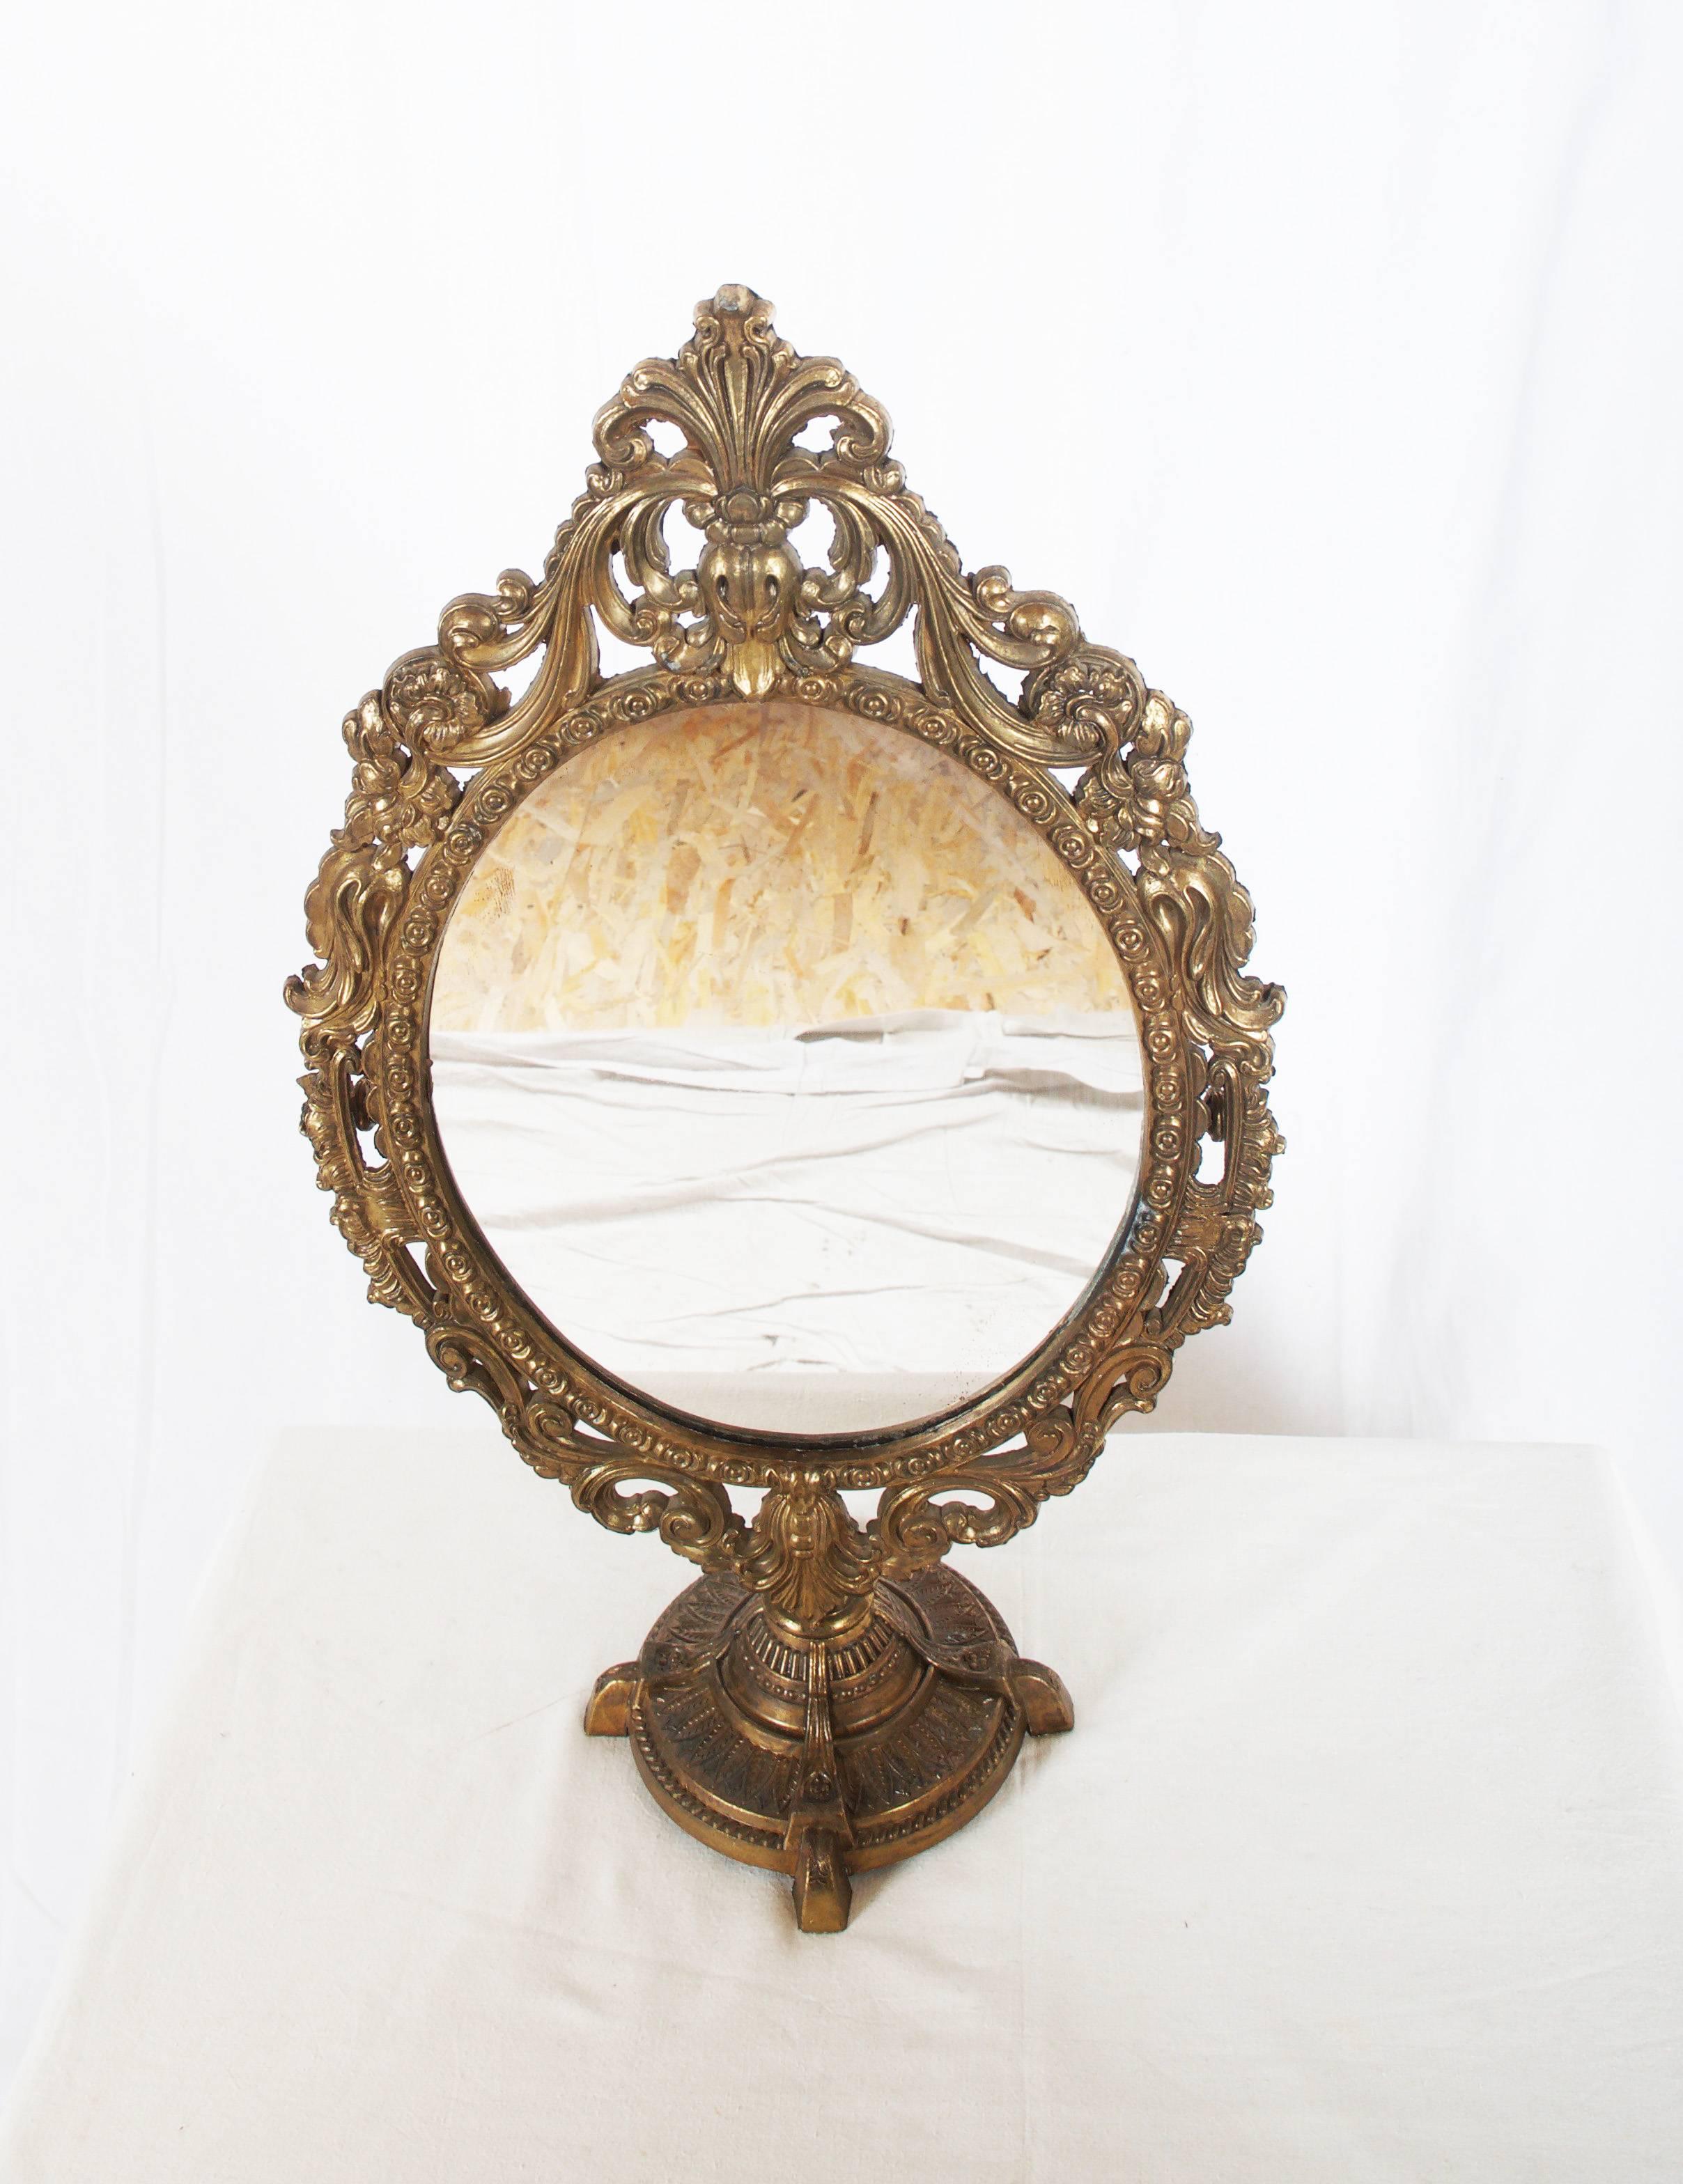 Brass round food and oval frame with mirror. Made in the 1860-1880 in Baroque style.